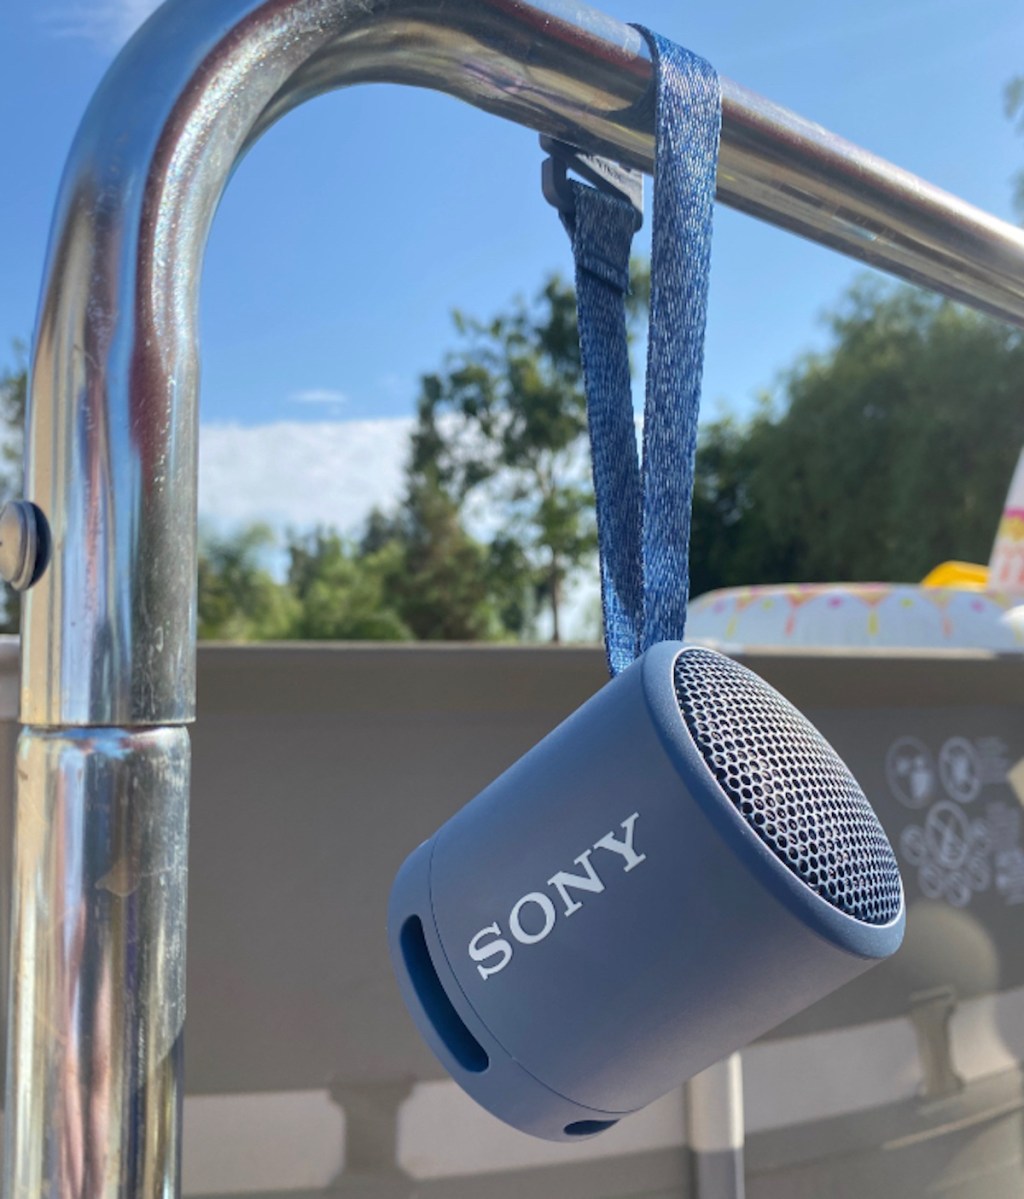 small sony speaker hanging from steel pipe outside